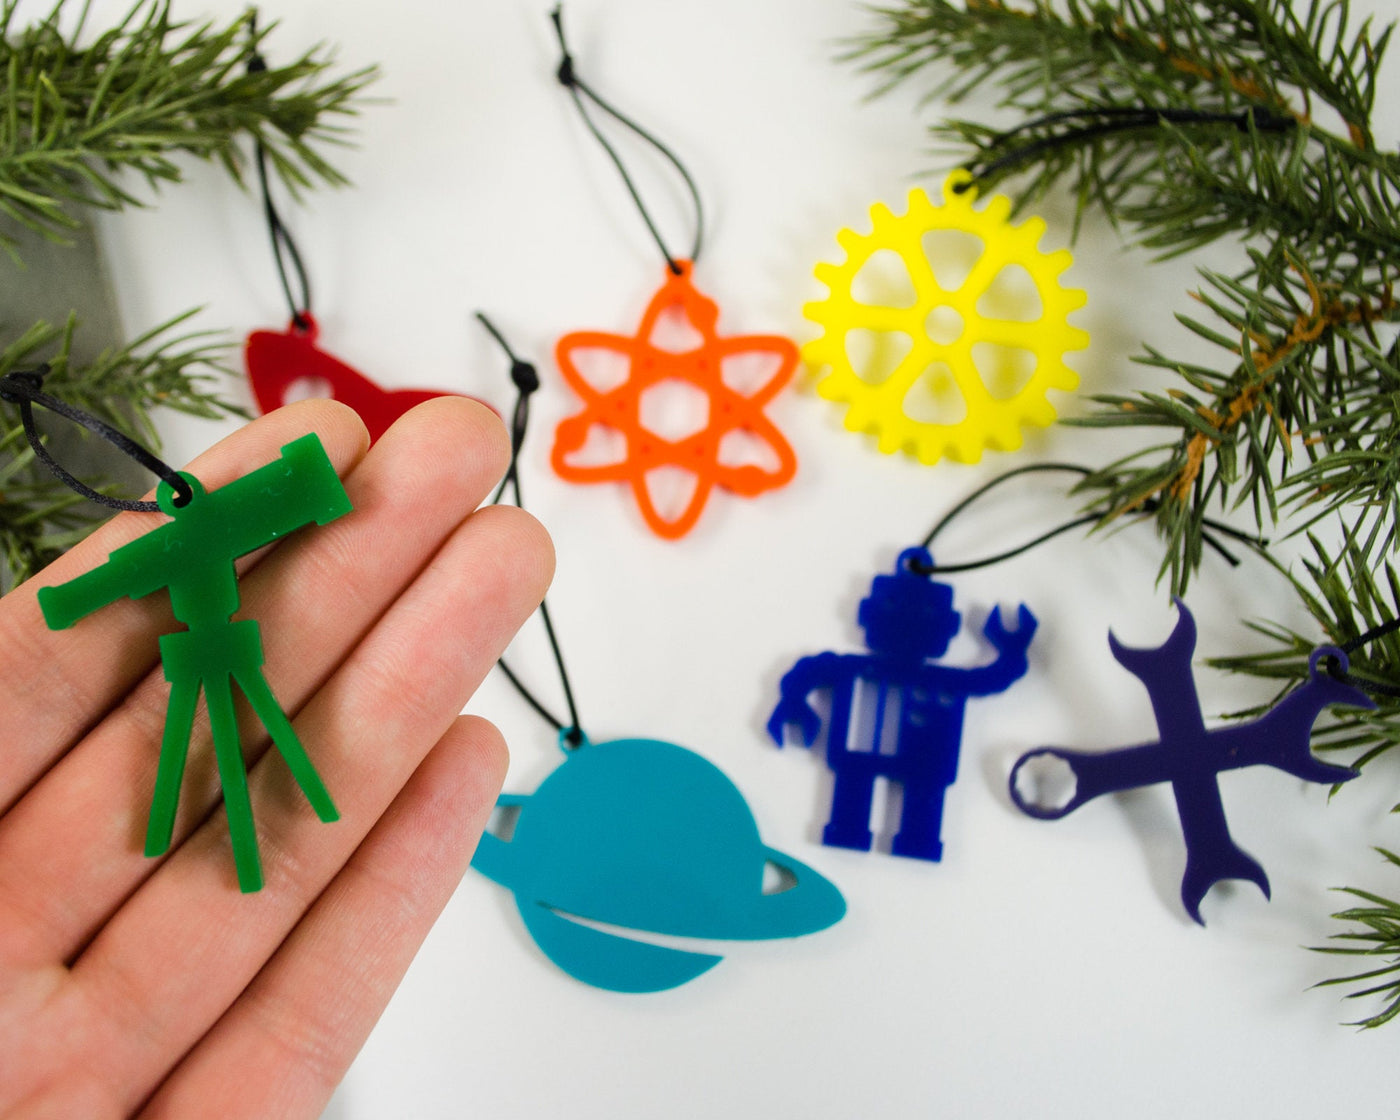 Physics and Engineering - Set of 7 Ornaments